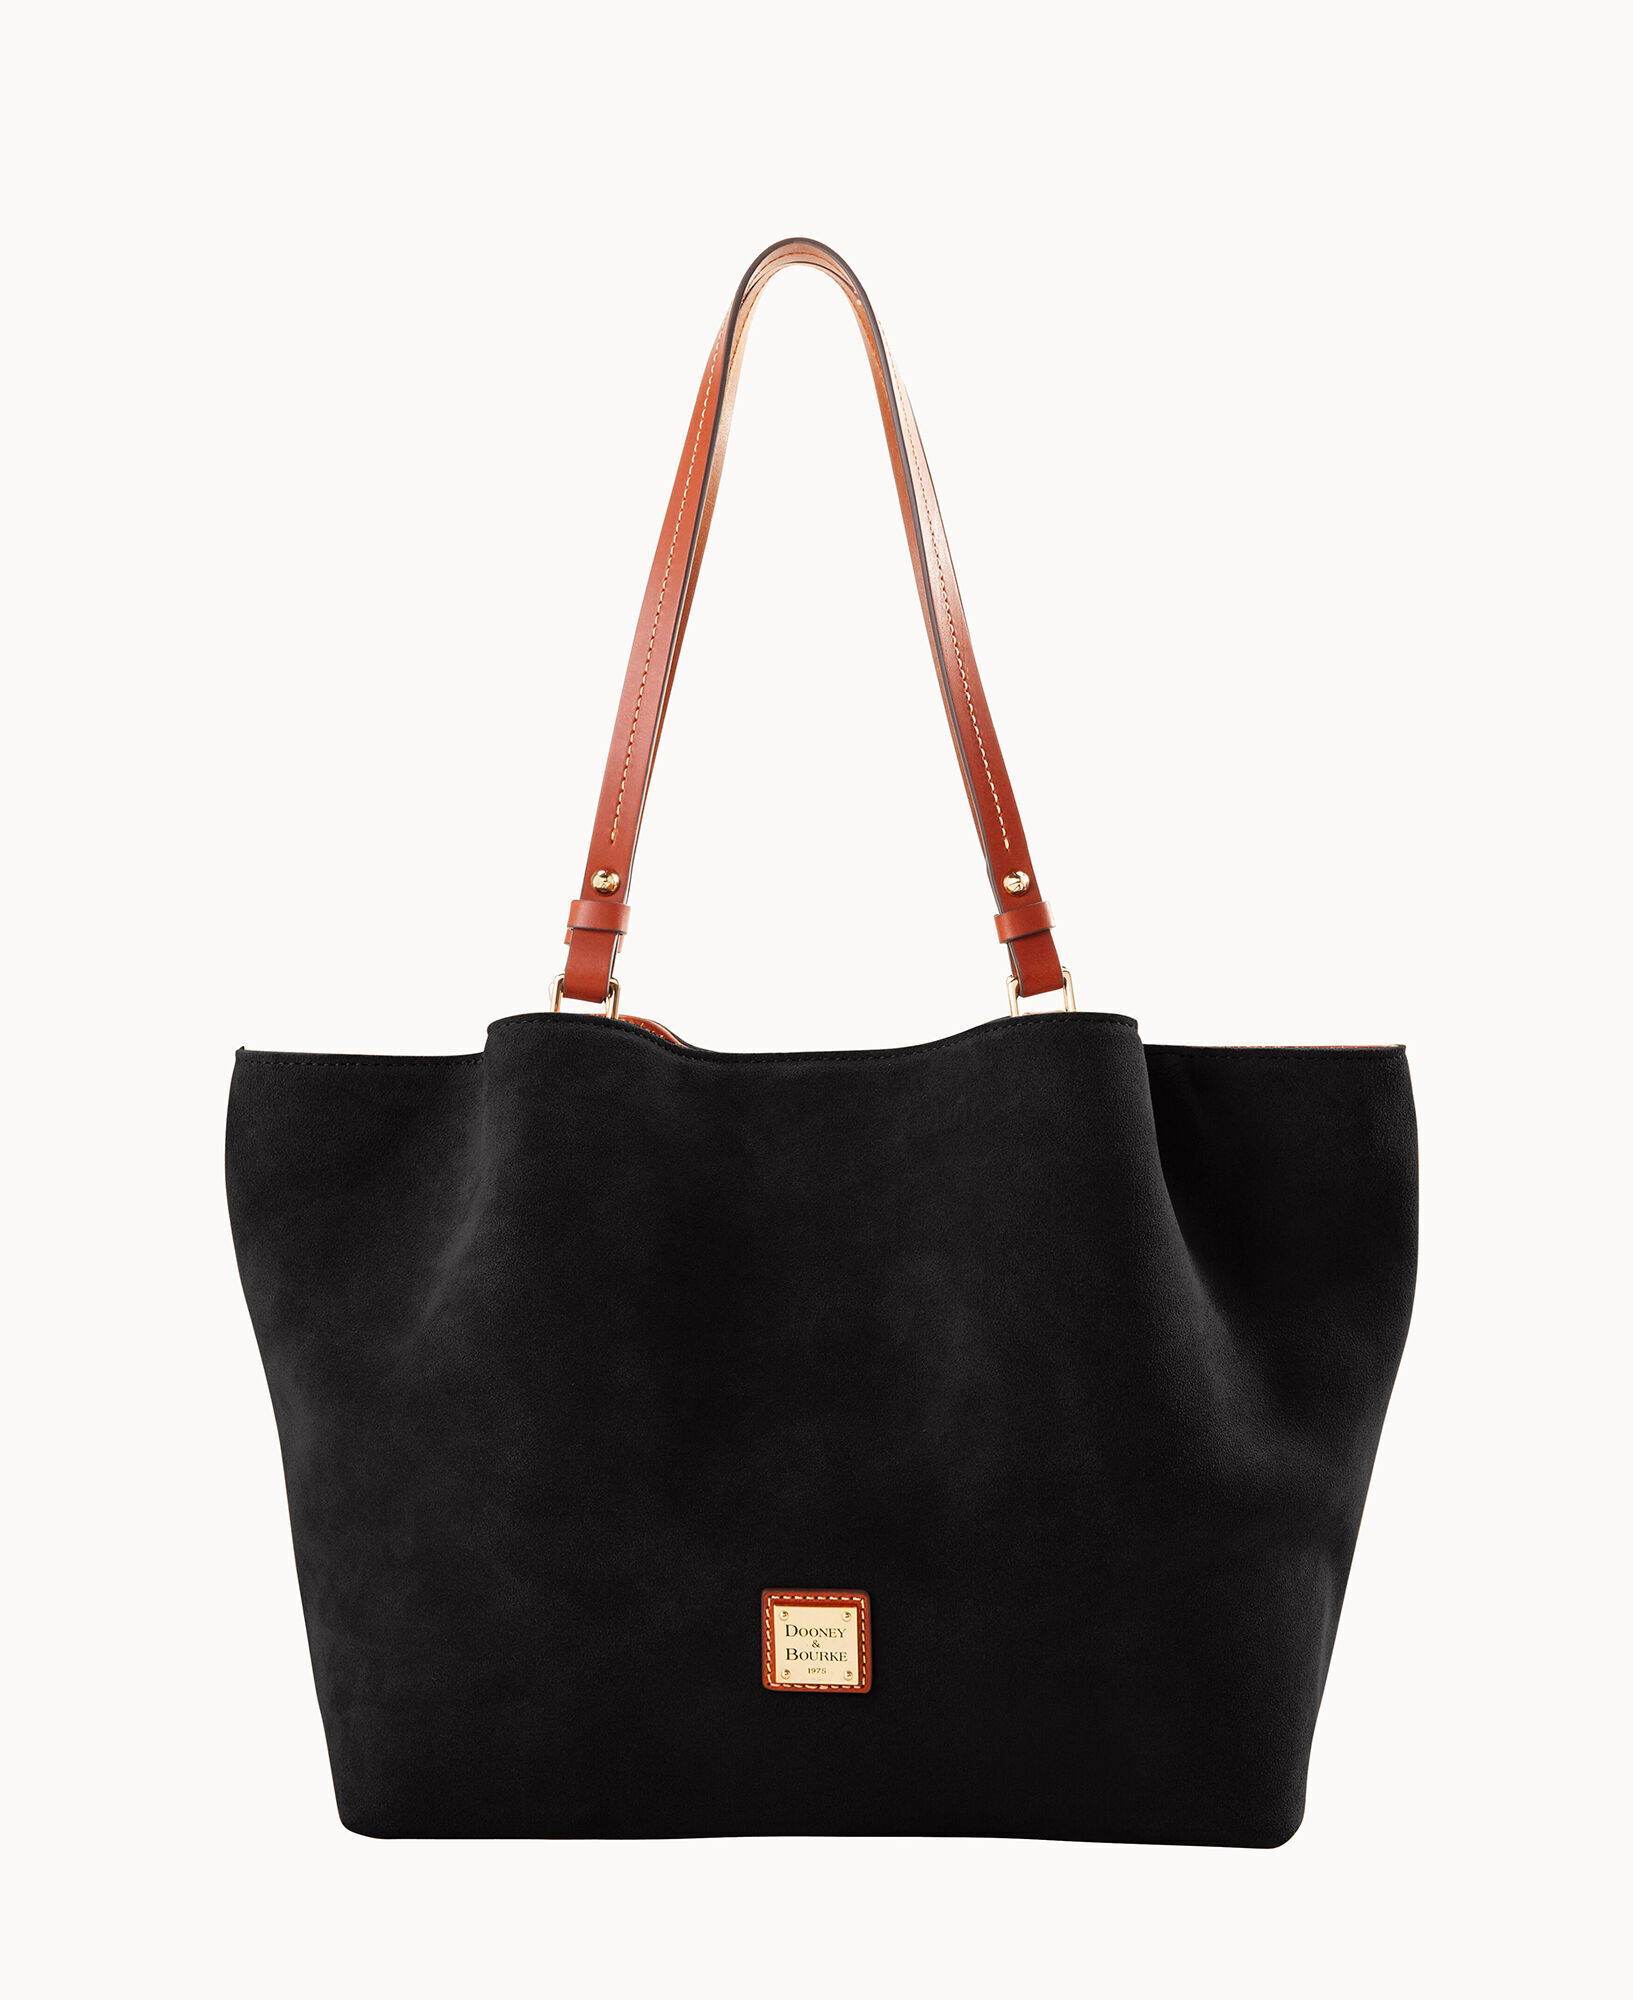 Shop The Suede Collection - Bags at Prices You Love | ILoveDooney